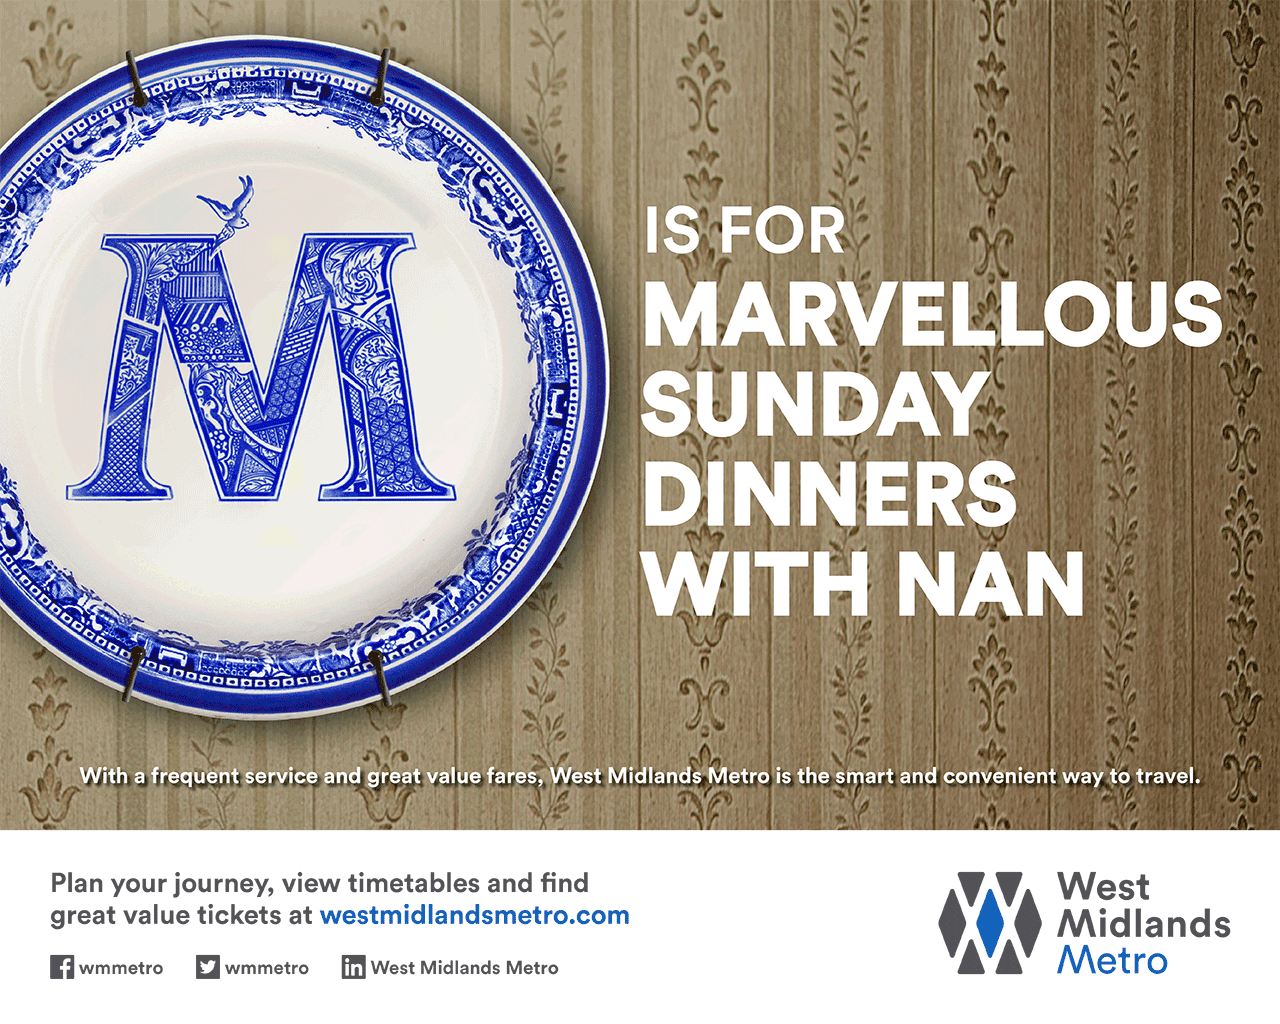 20358-wmm-m-is-for-nans-dinner-2.png